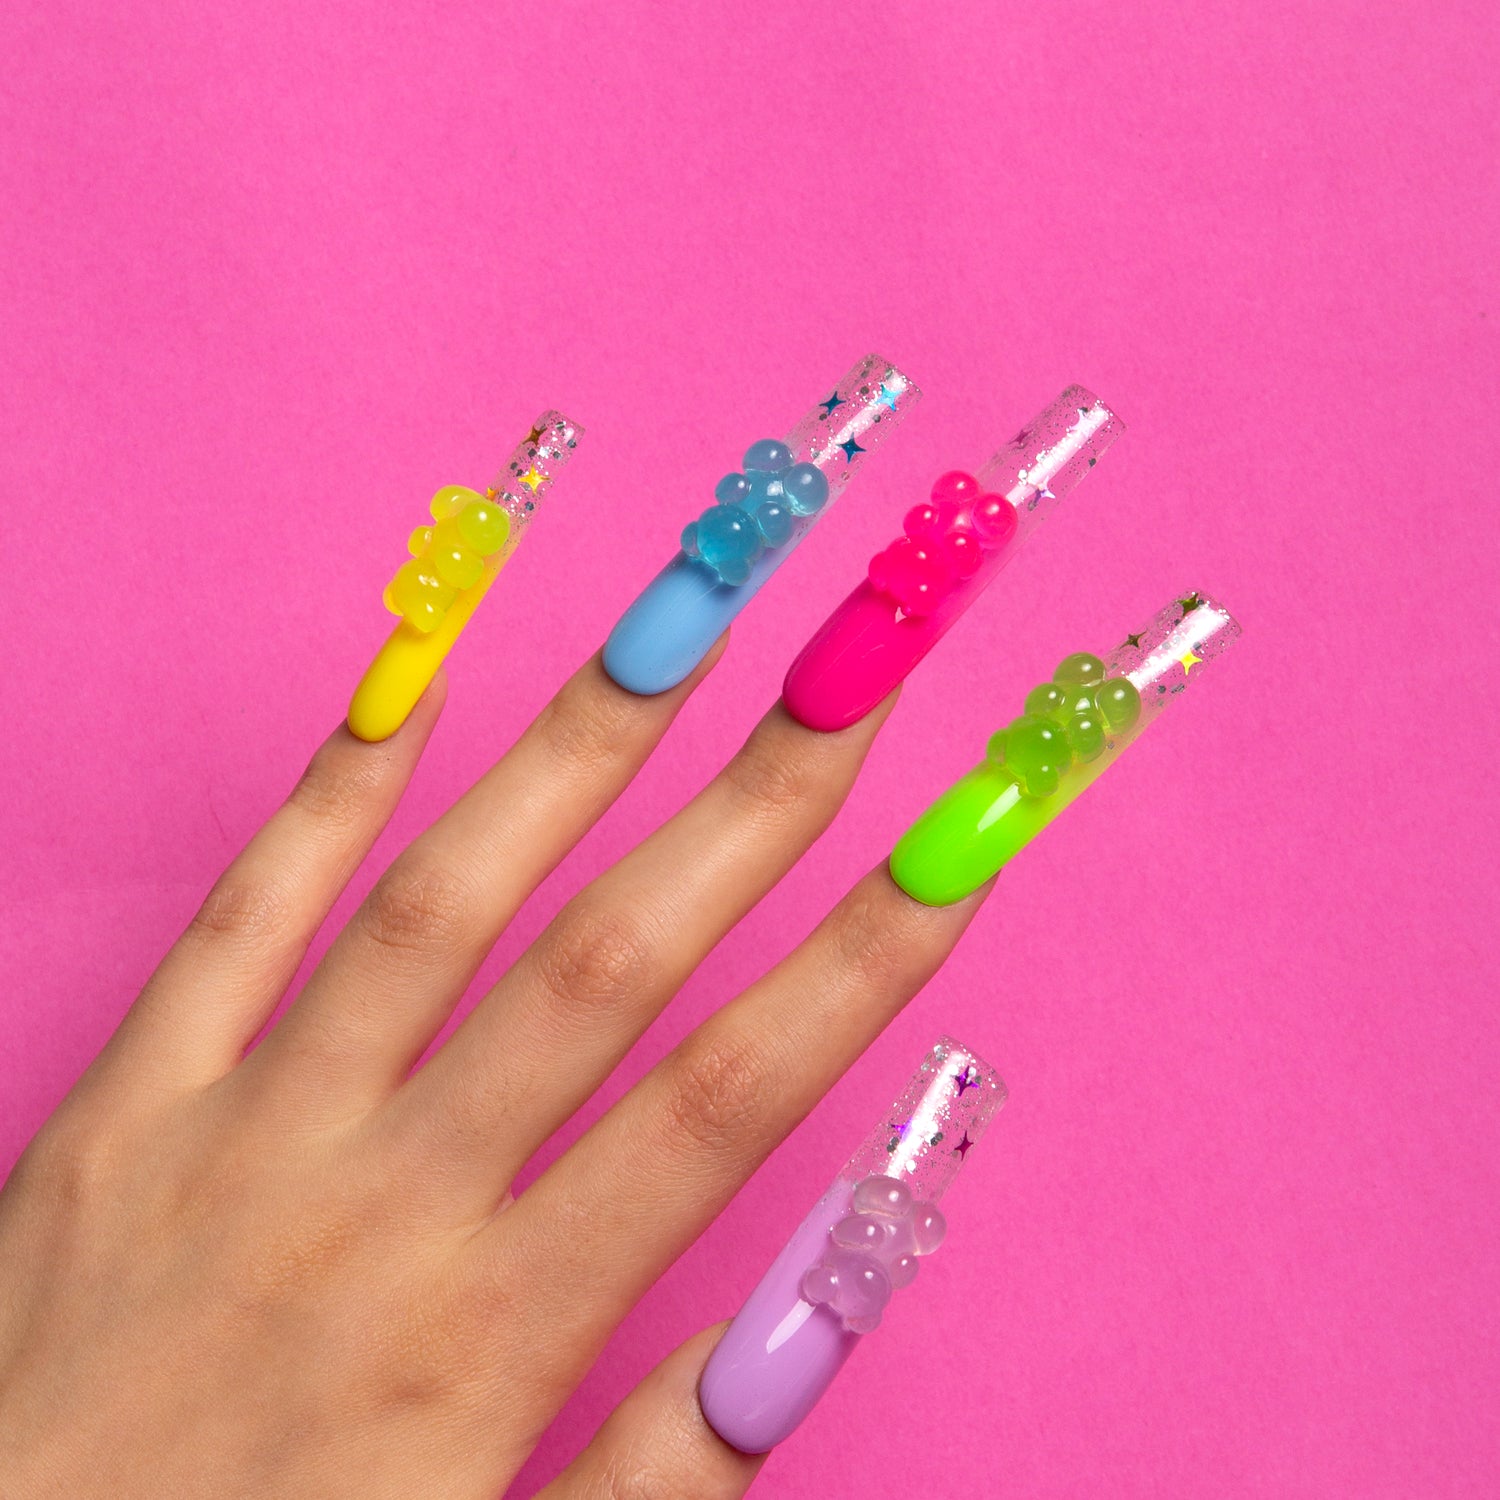 Sweet Wonderland press-on nails. Each nail is a different color, from candy pink to sunshine yellow. Fun and personality.